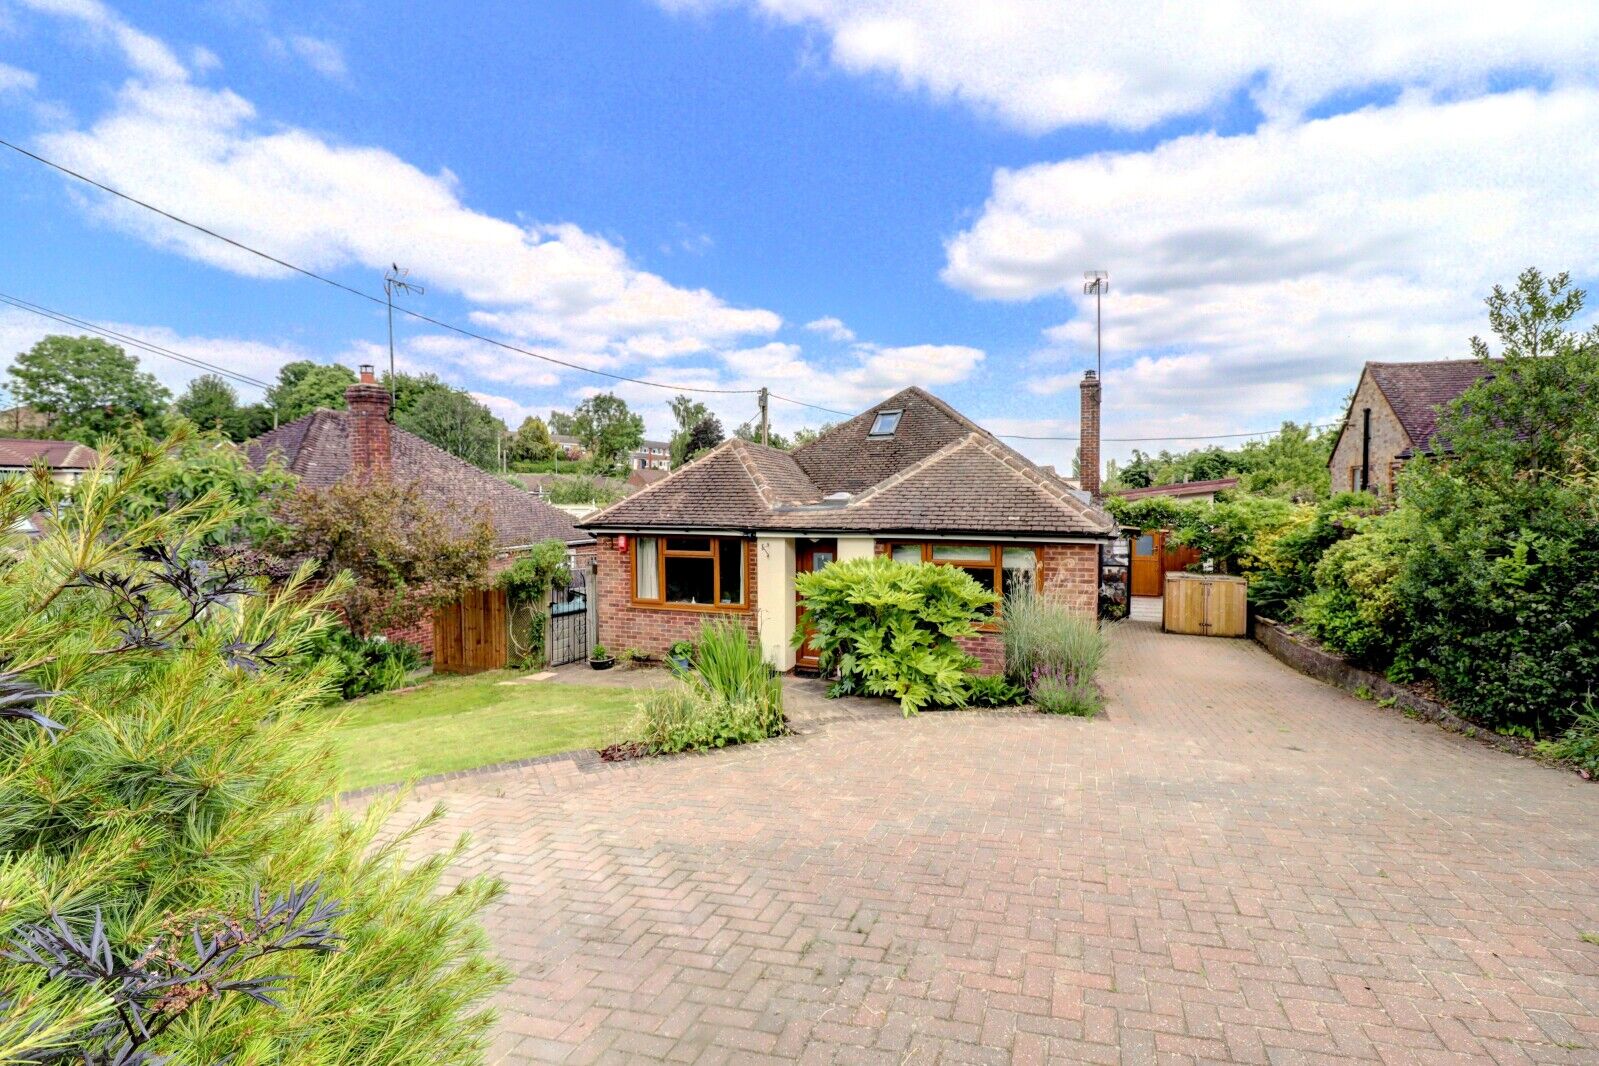 5 bedroom detached bungalow for sale Windmill Lane, Widmer End, HP15, main image